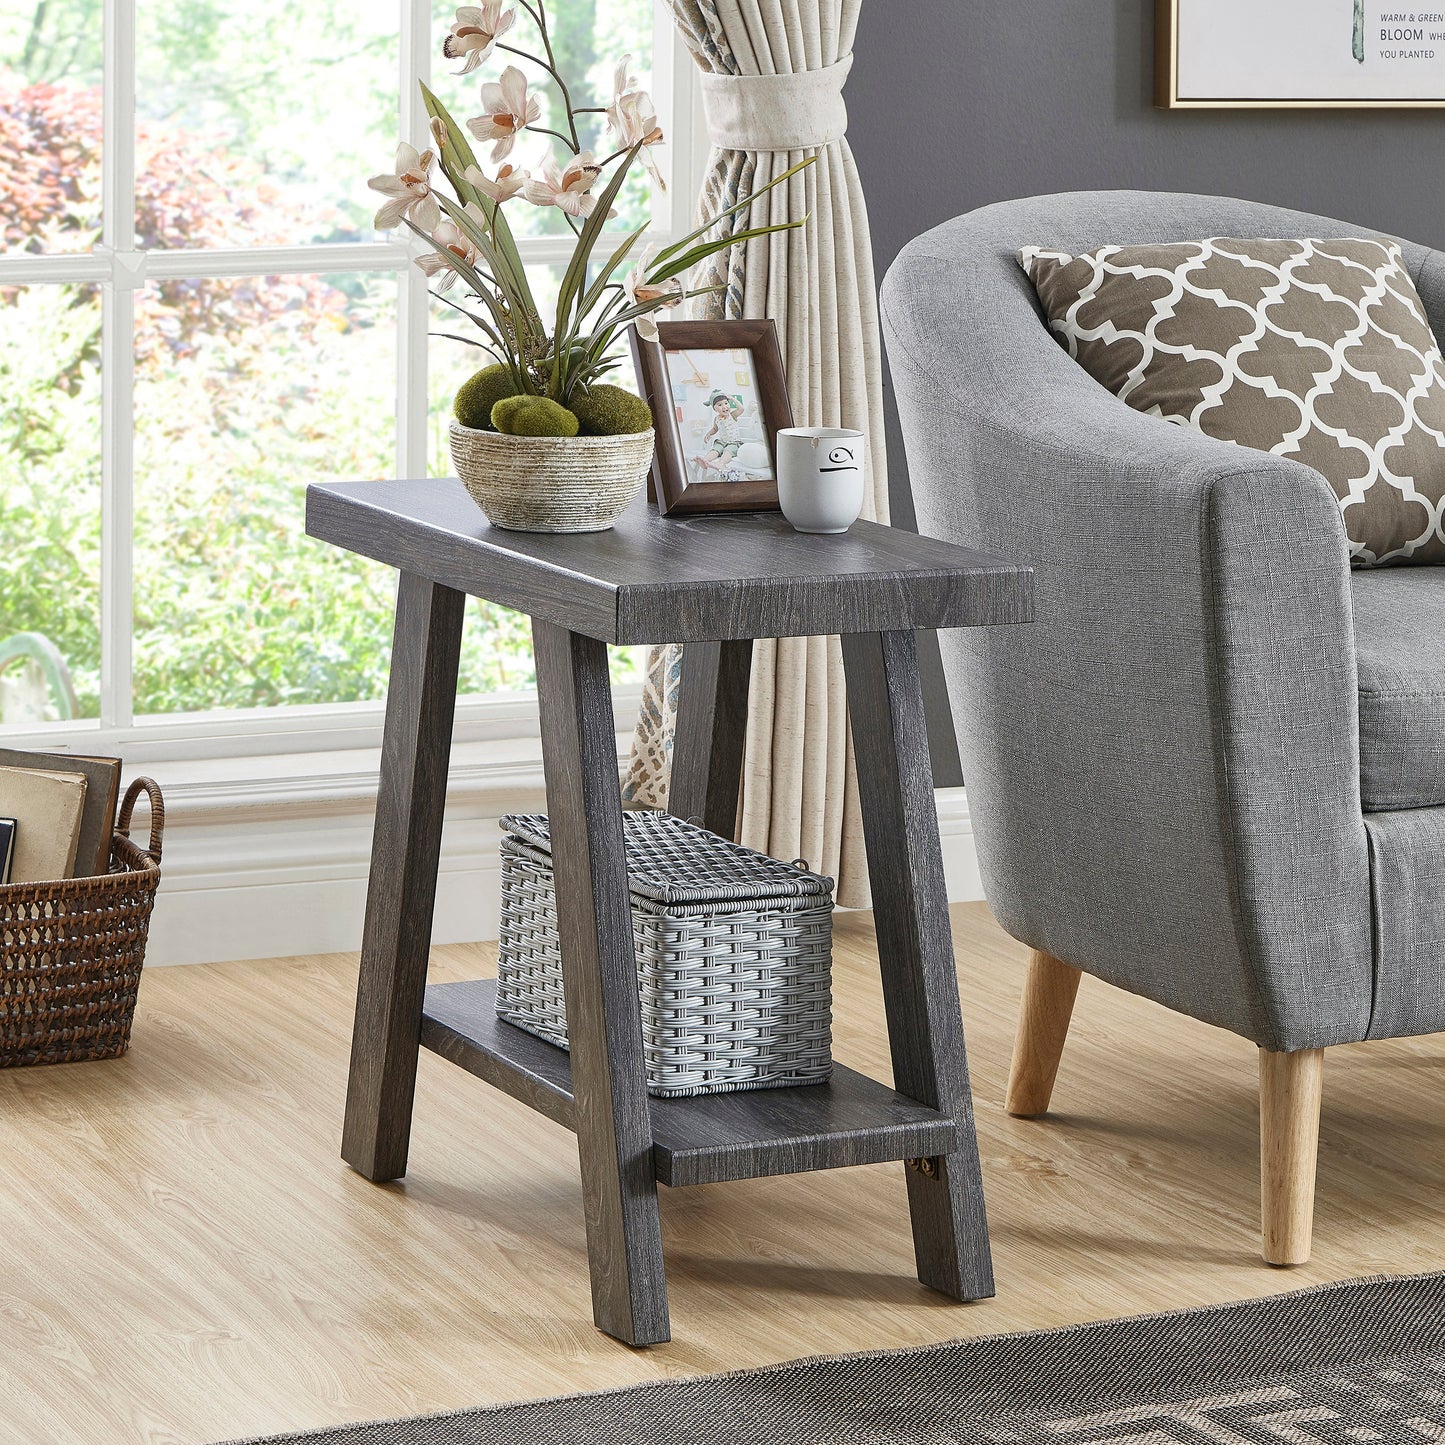 Athens Contemporary Wood Shelf Side Table in Gray Finish